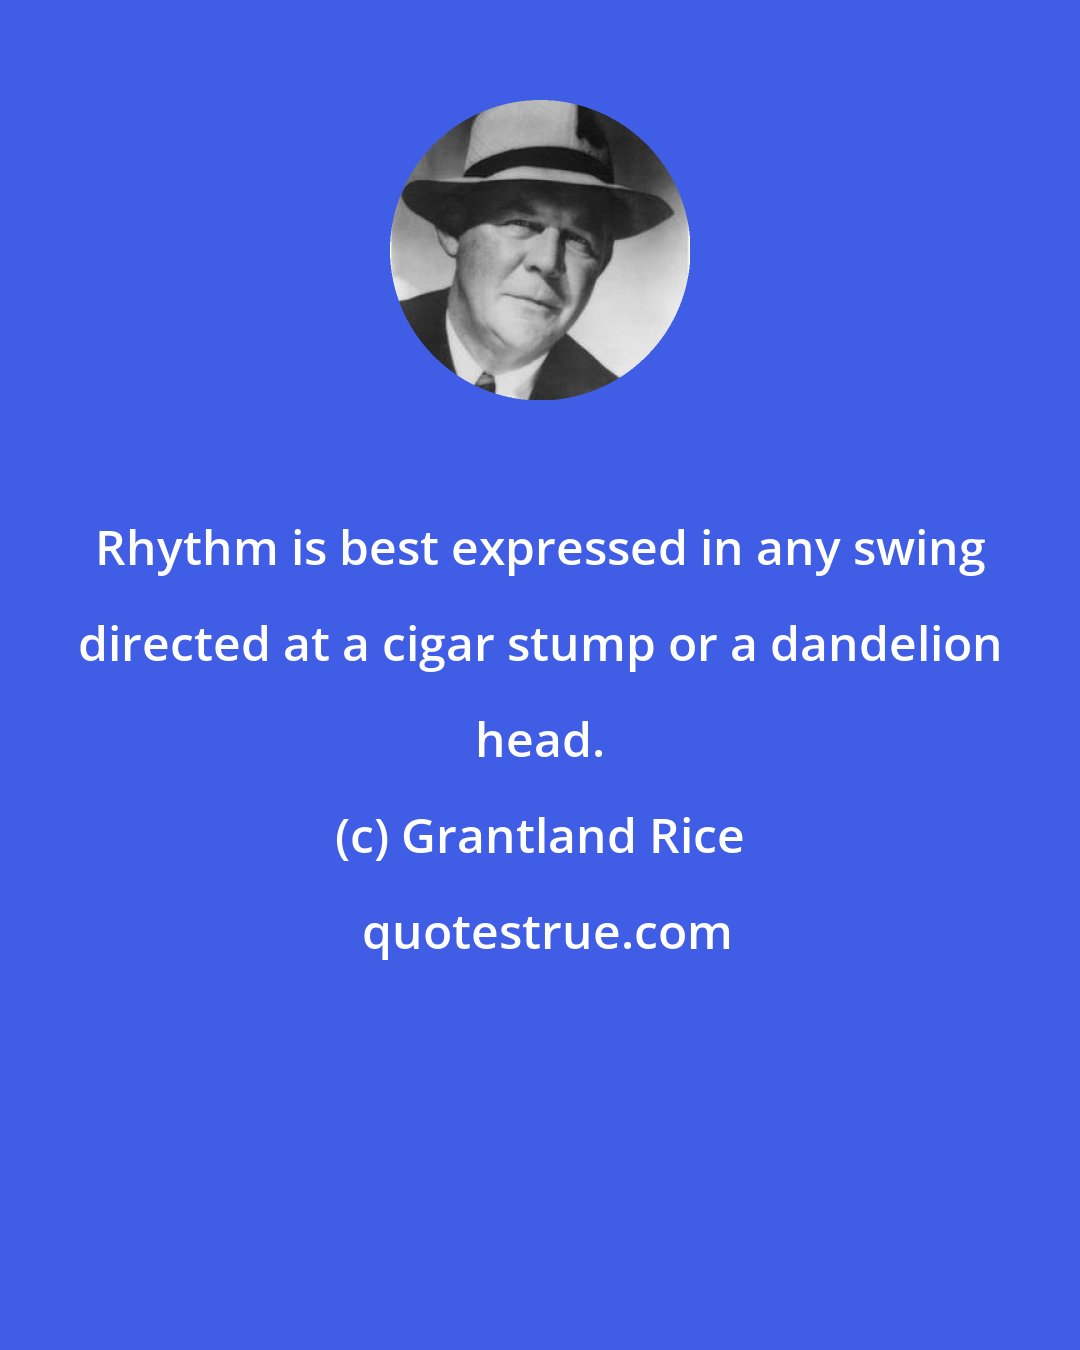 Grantland Rice: Rhythm is best expressed in any swing directed at a cigar stump or a dandelion head.